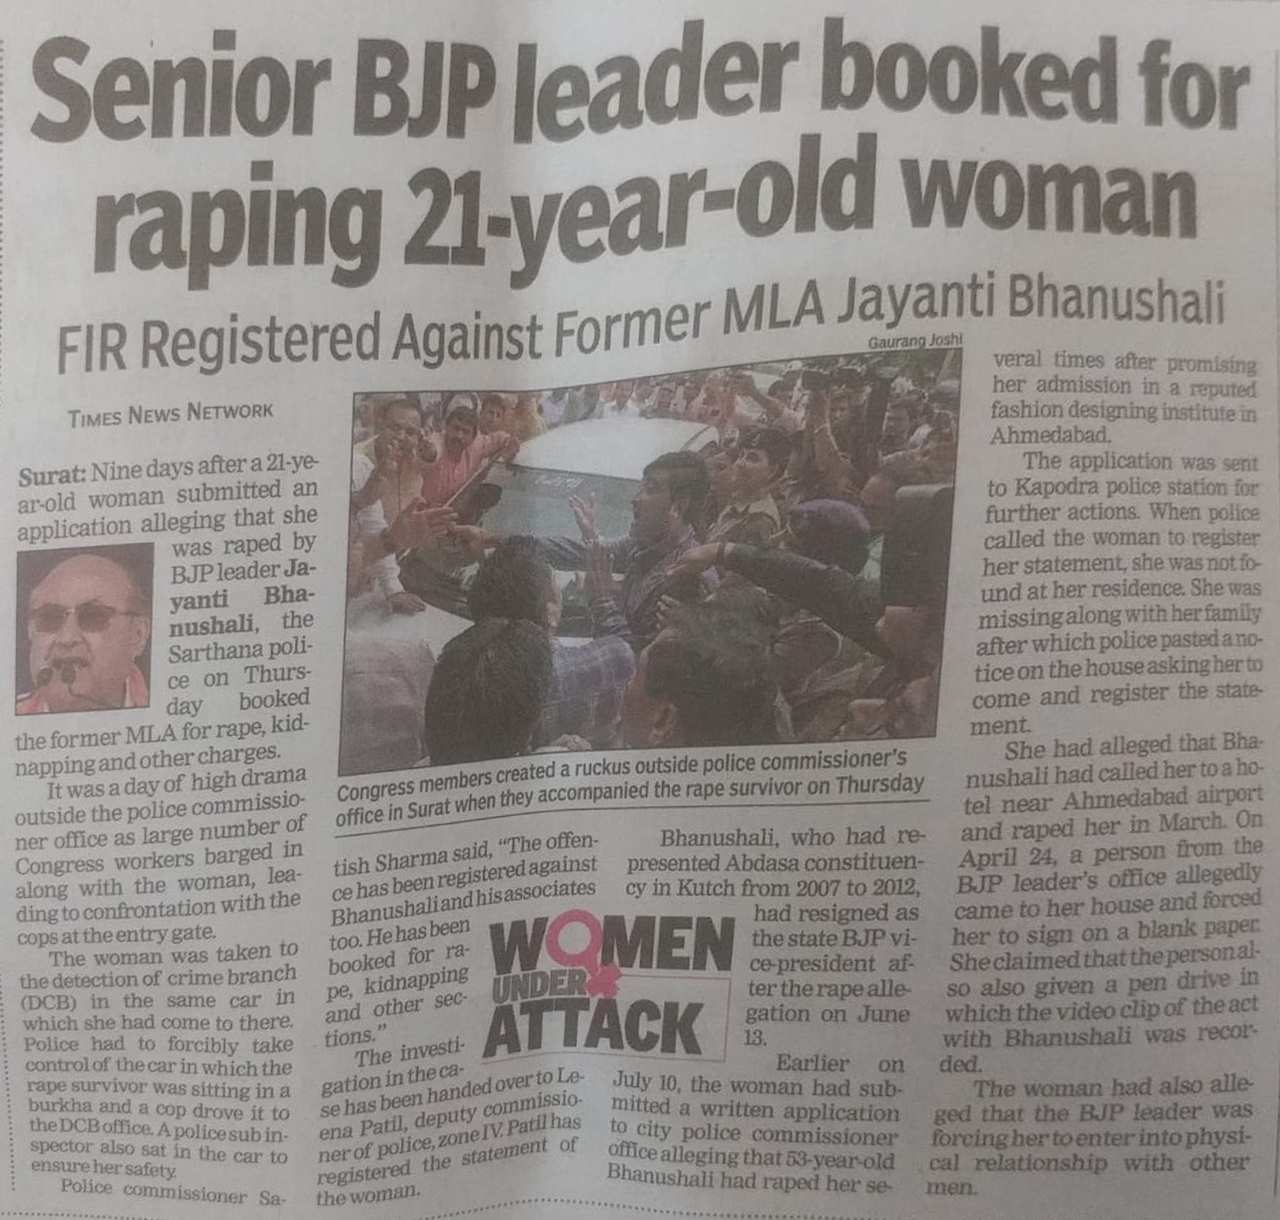 Senior BJP leader booked for raping 21-year-old woman